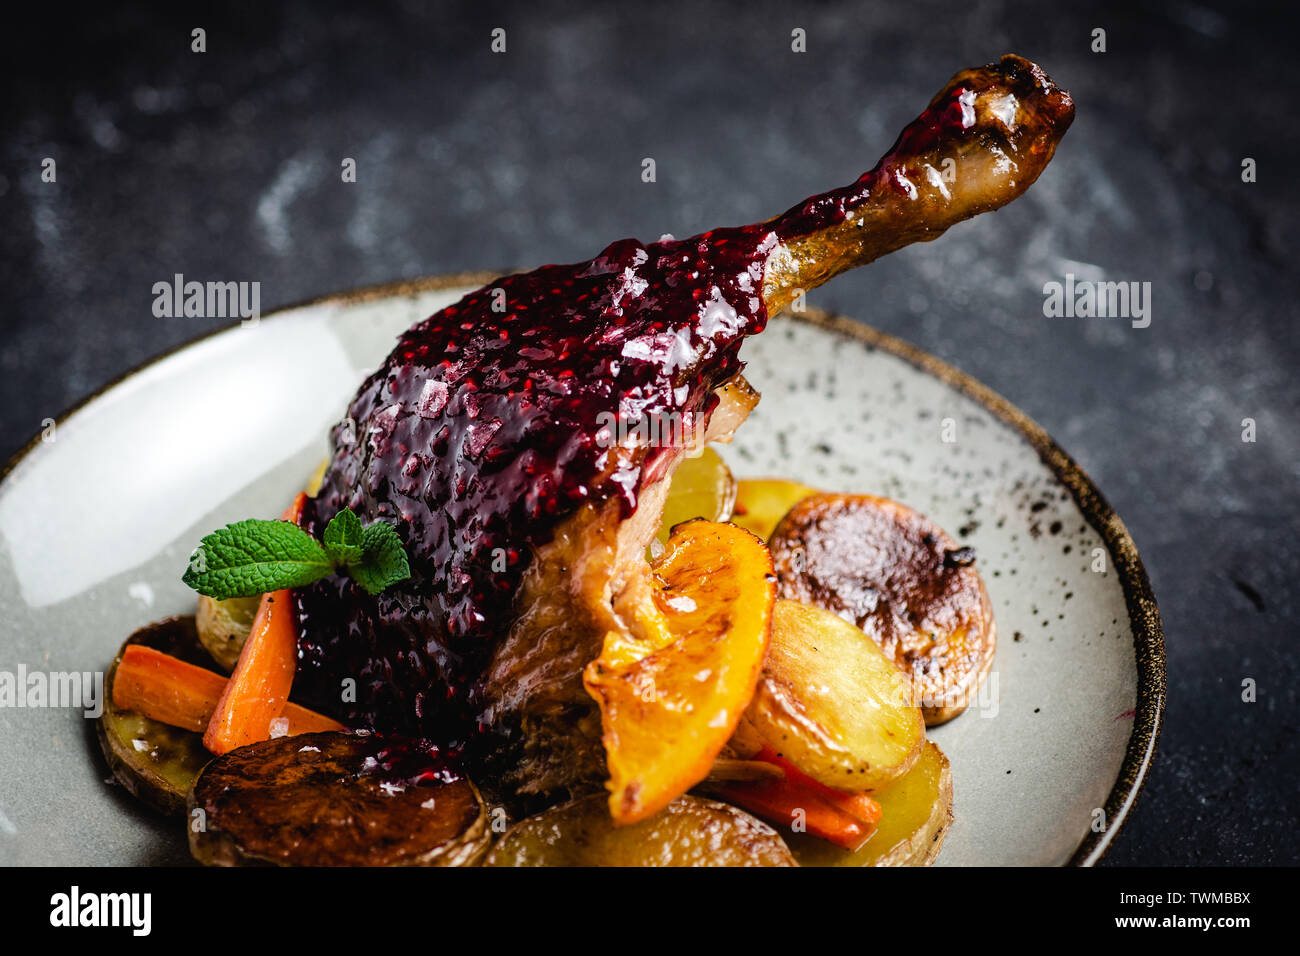 Roasted Fat Goose Leg with Potatoes, Carrots and Oranges Stock Photo